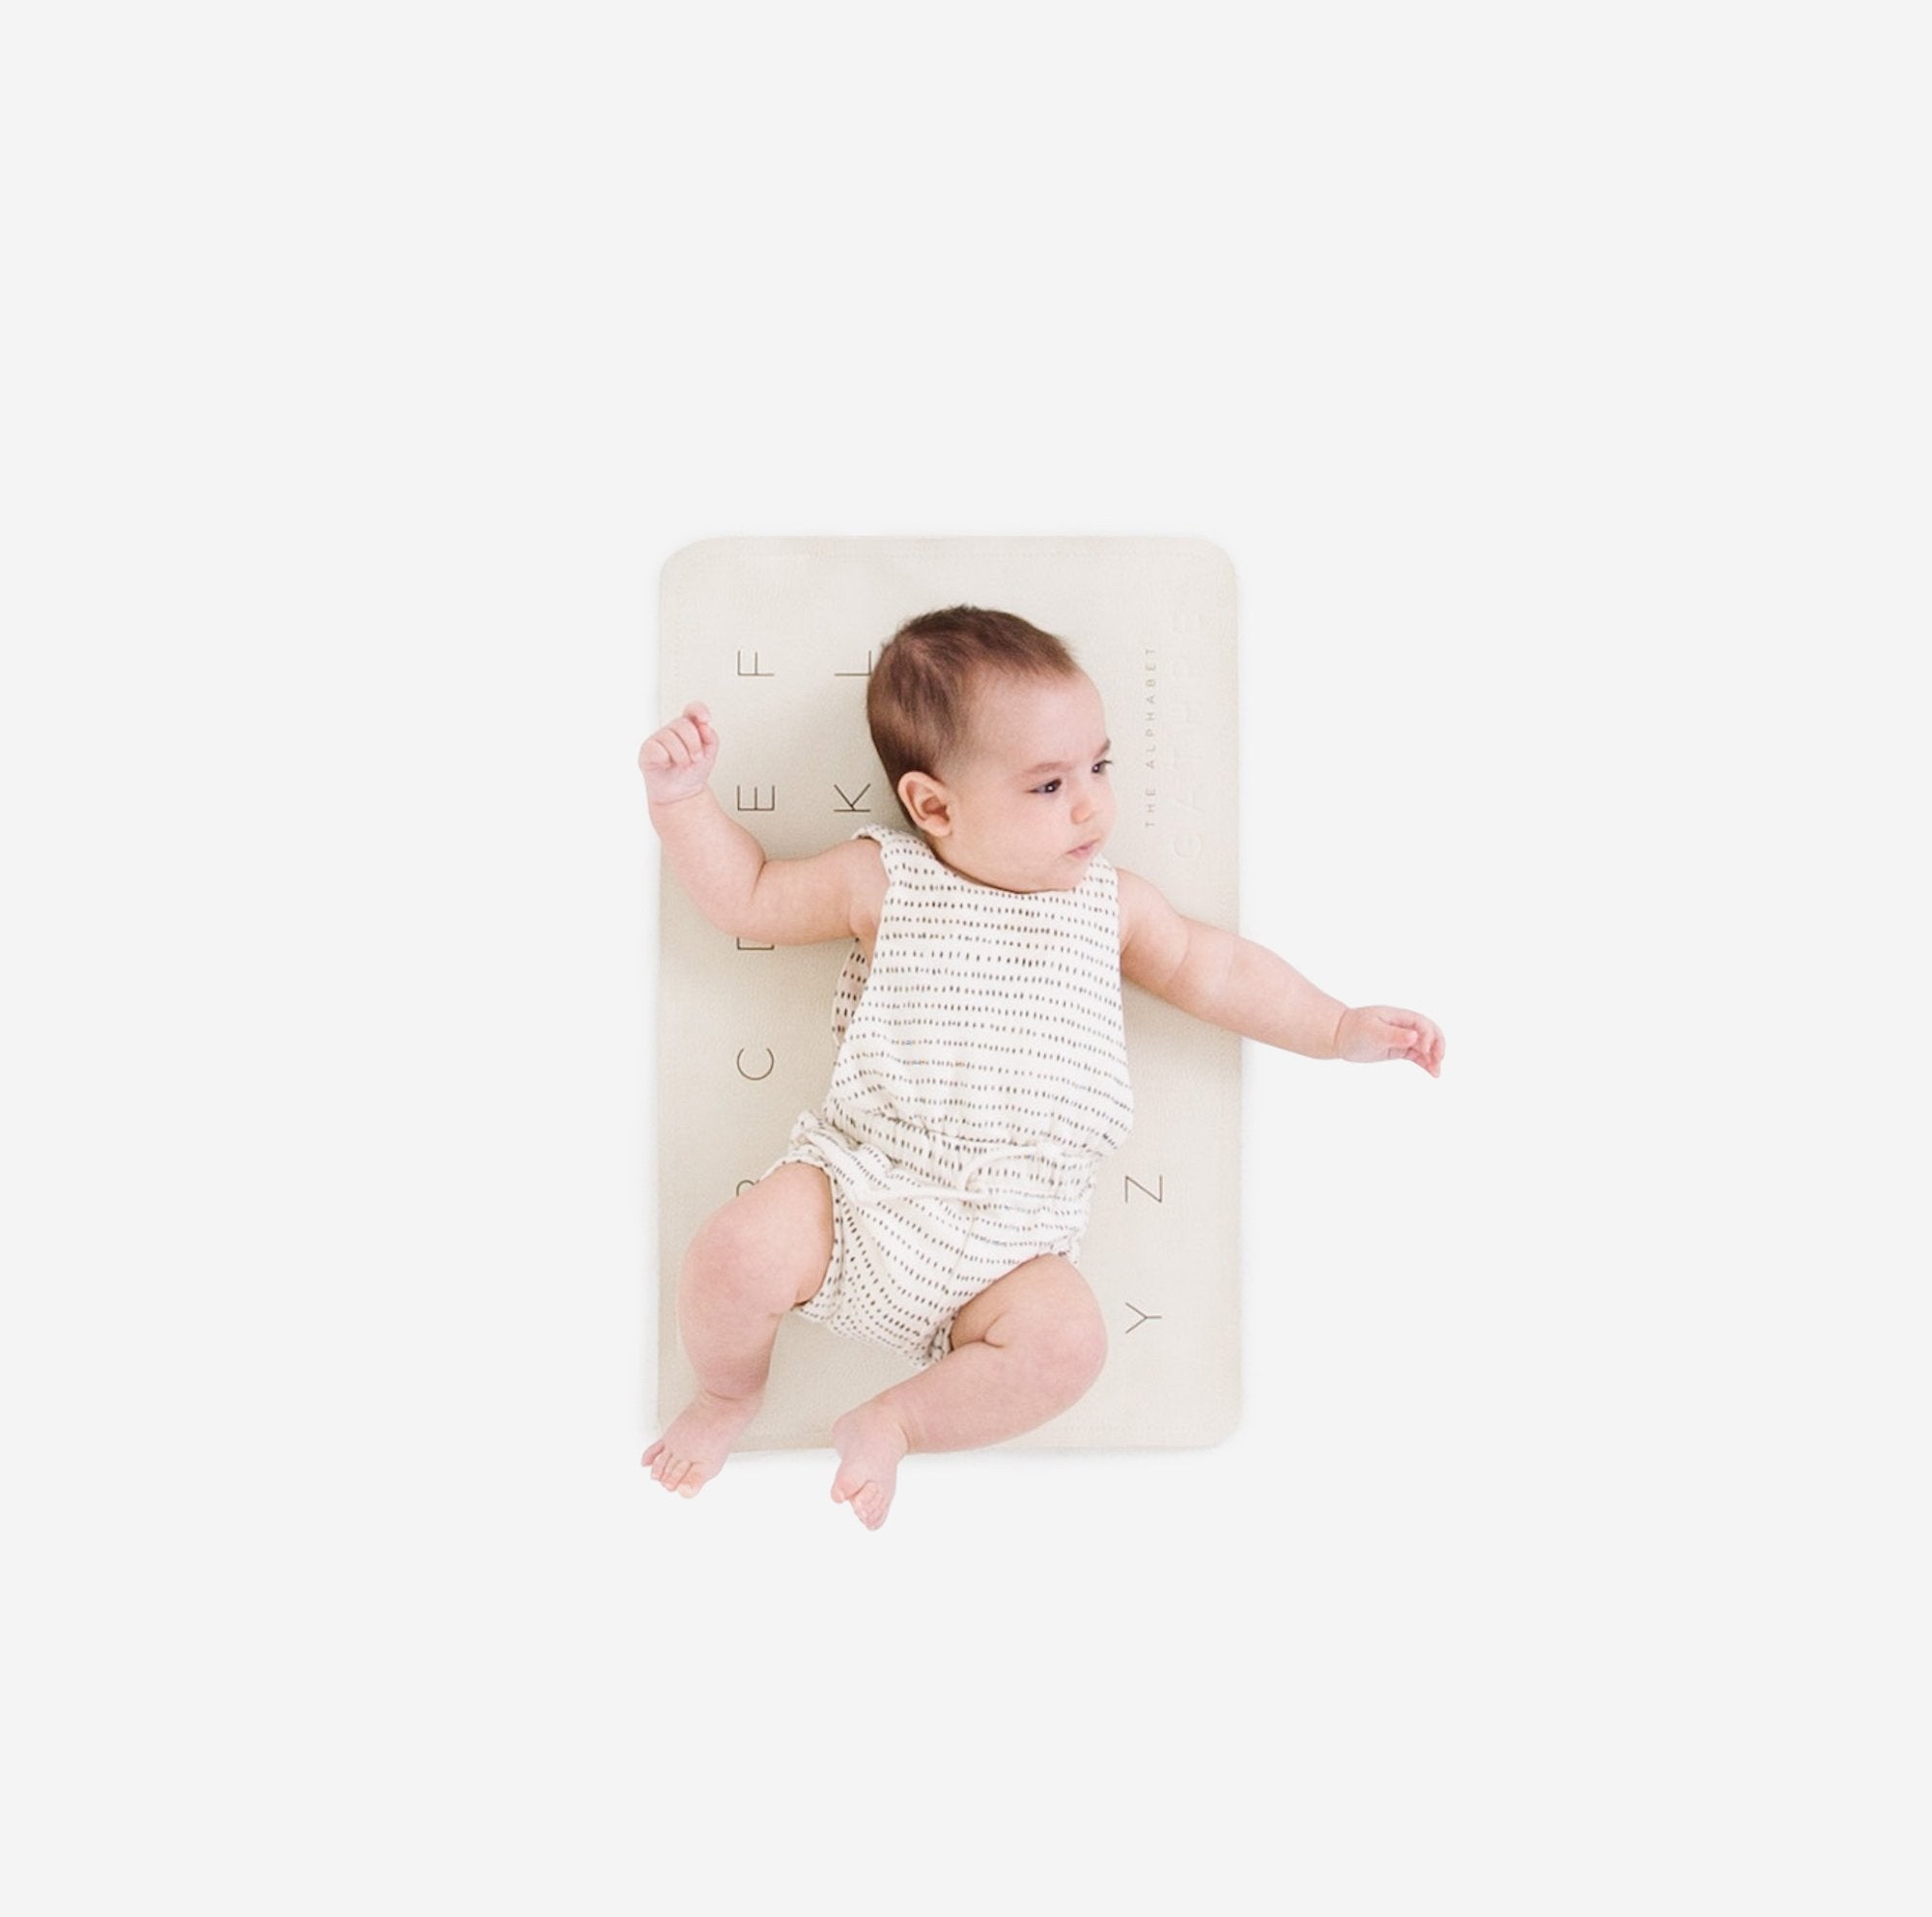 ABC (on sale)@overhead of baby on the ABC micro mat